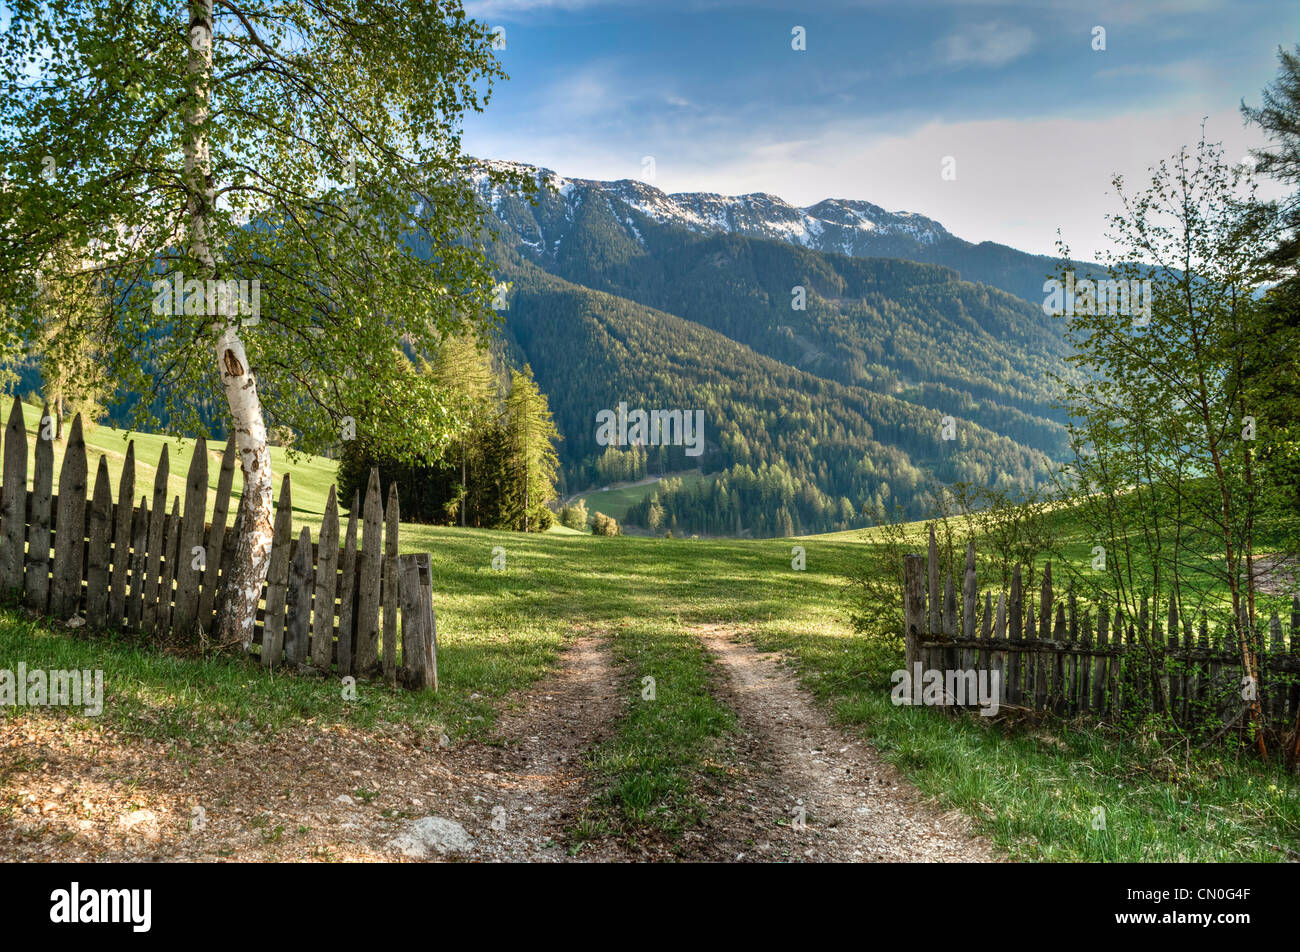 Two-lane path to a mountain meadow in the Italian Alps Stock Photo